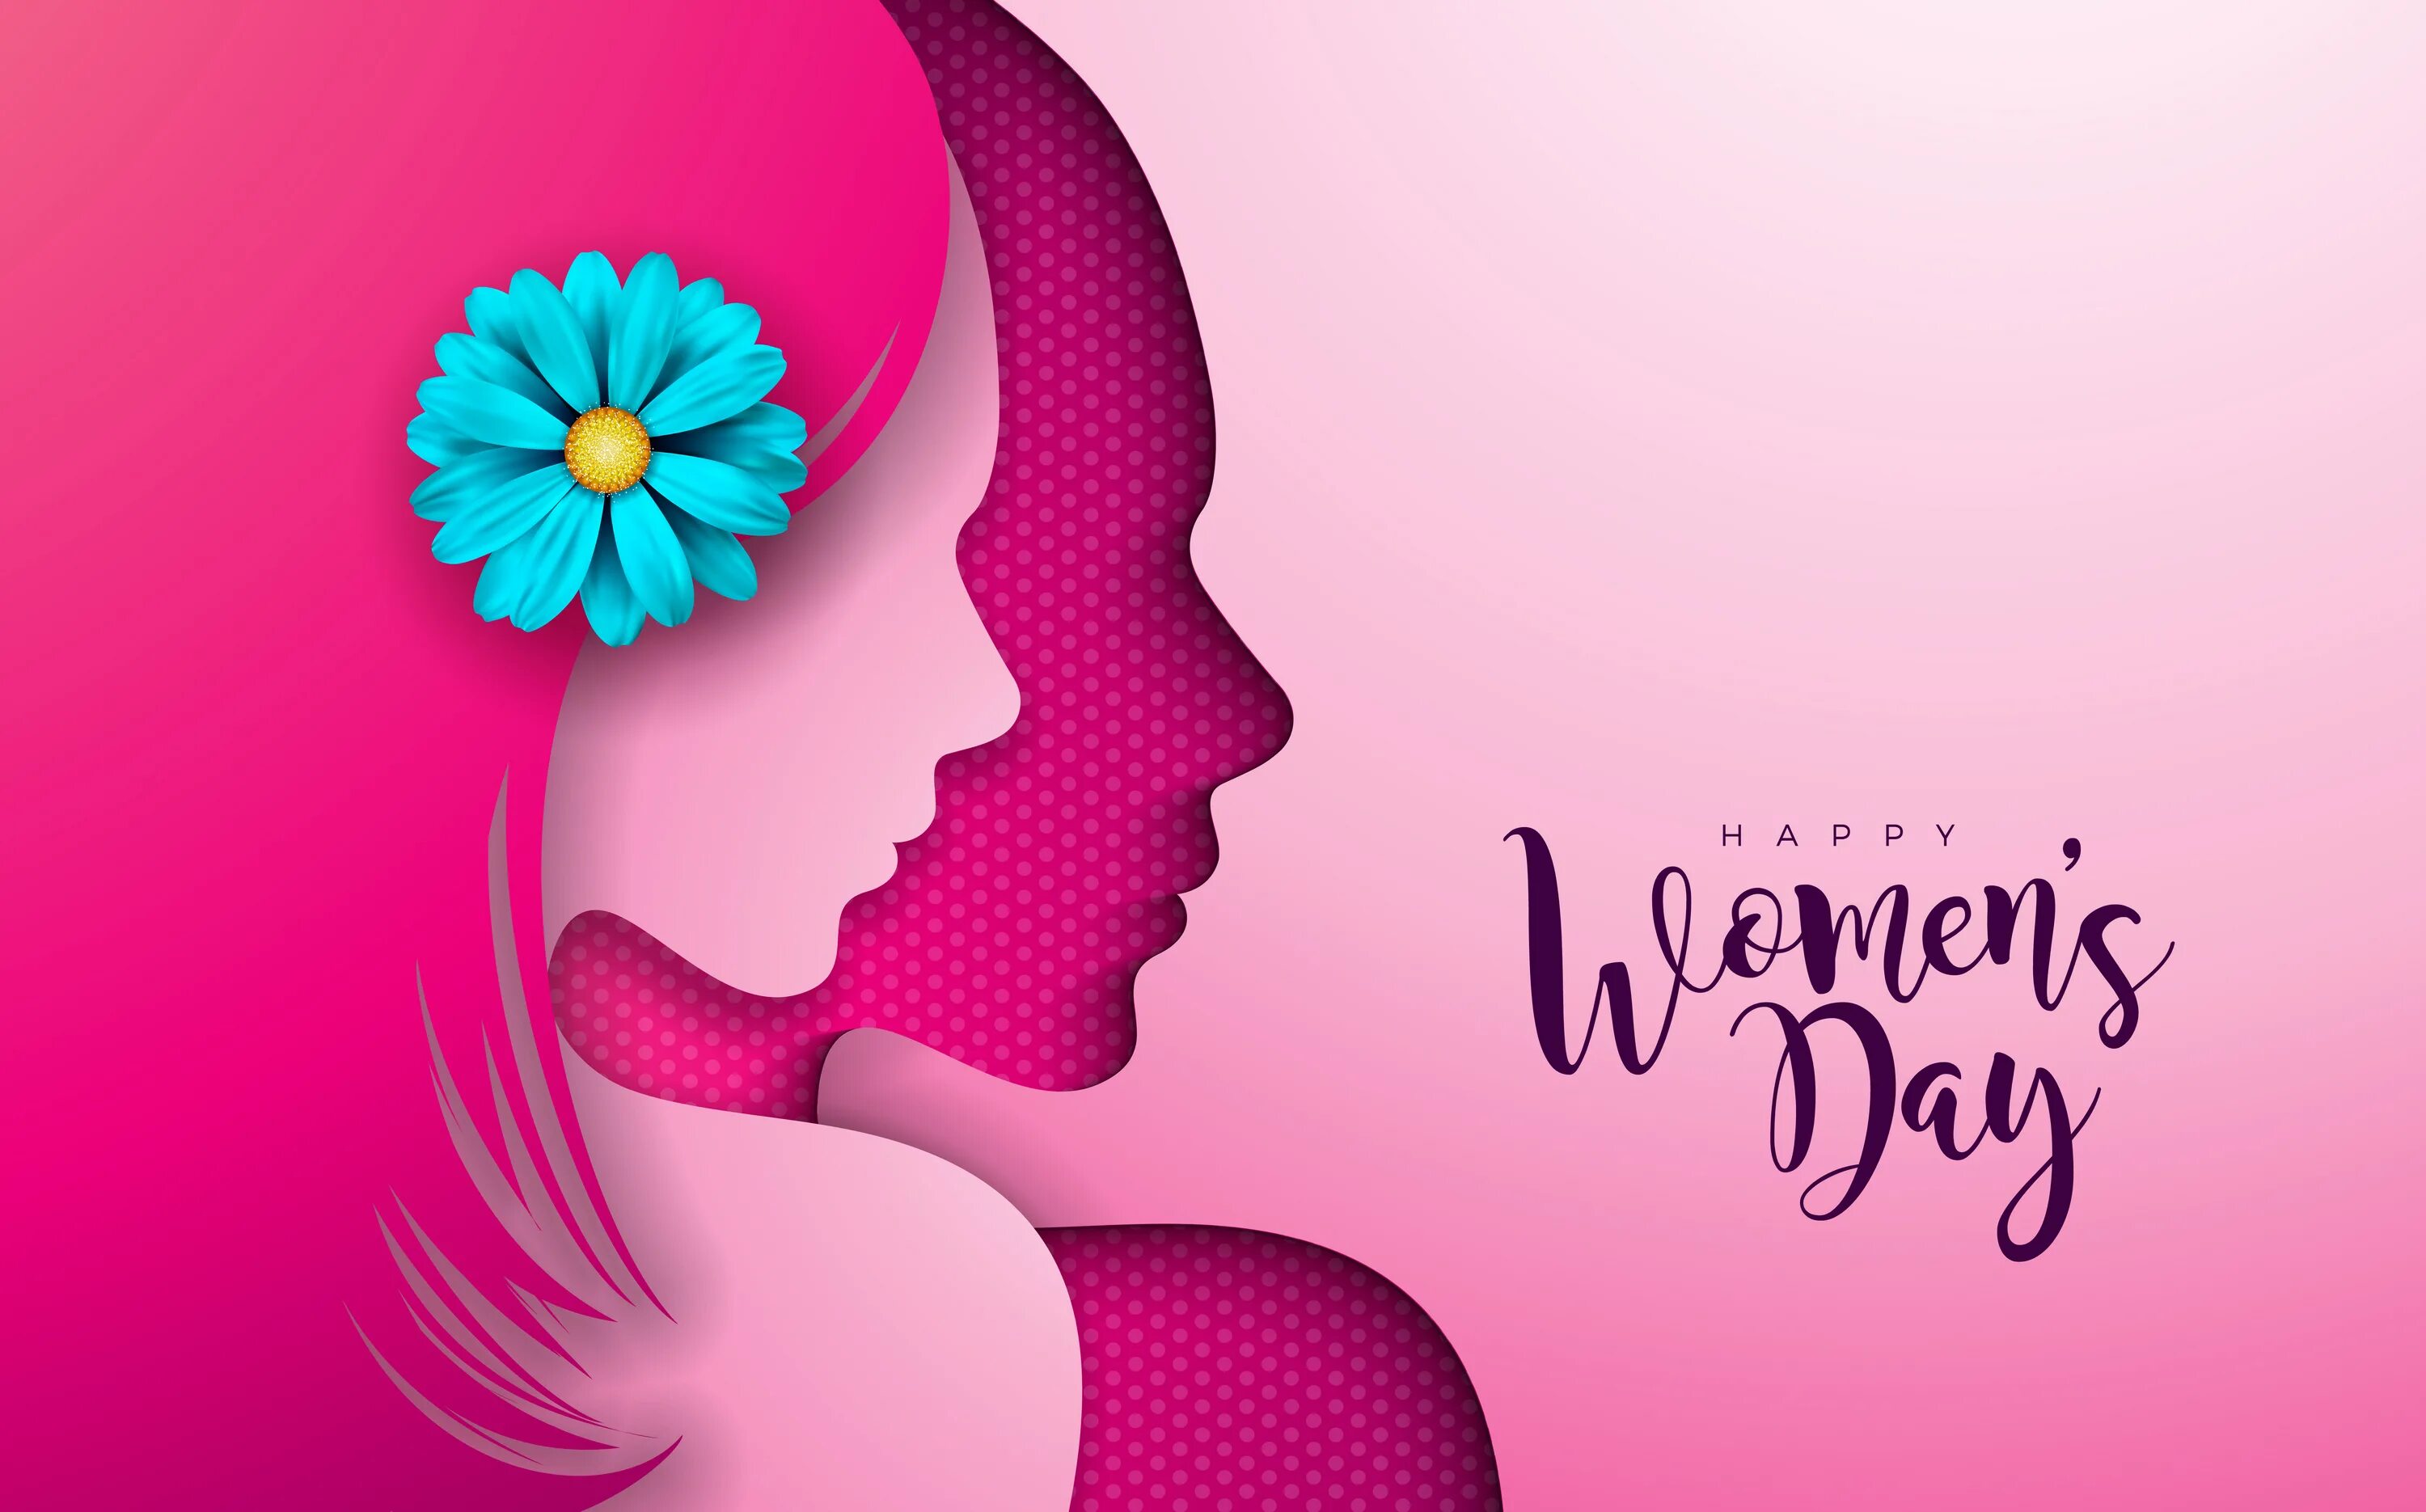 8 th of march. Открытка "women's Day".